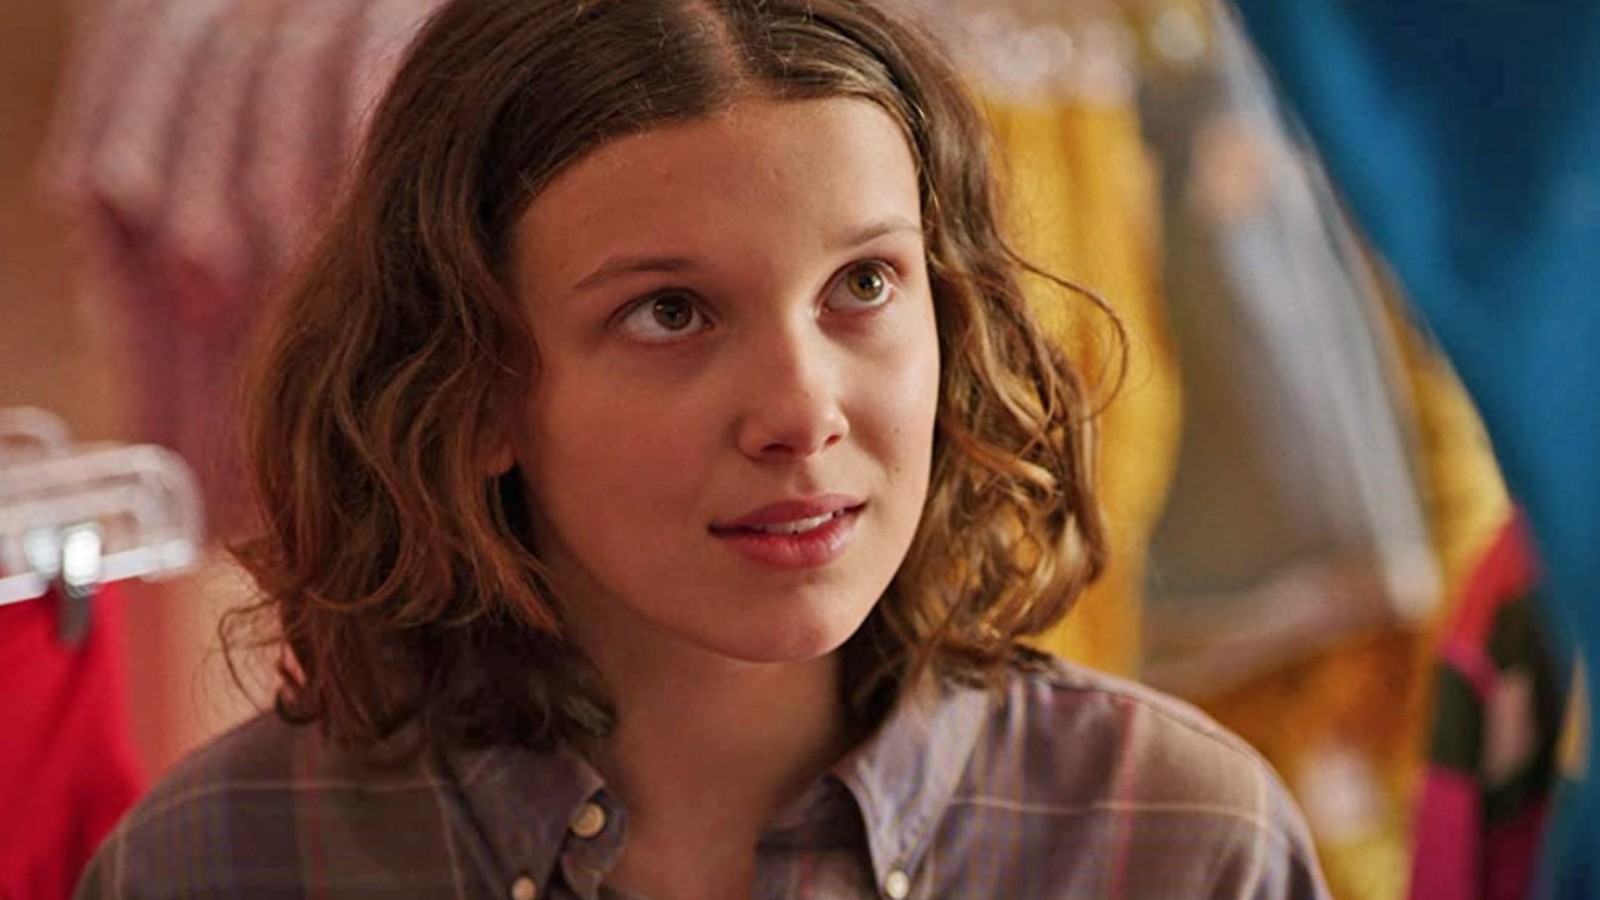 Millie Bobby Brown Is Ready to Move on From Stranger Things